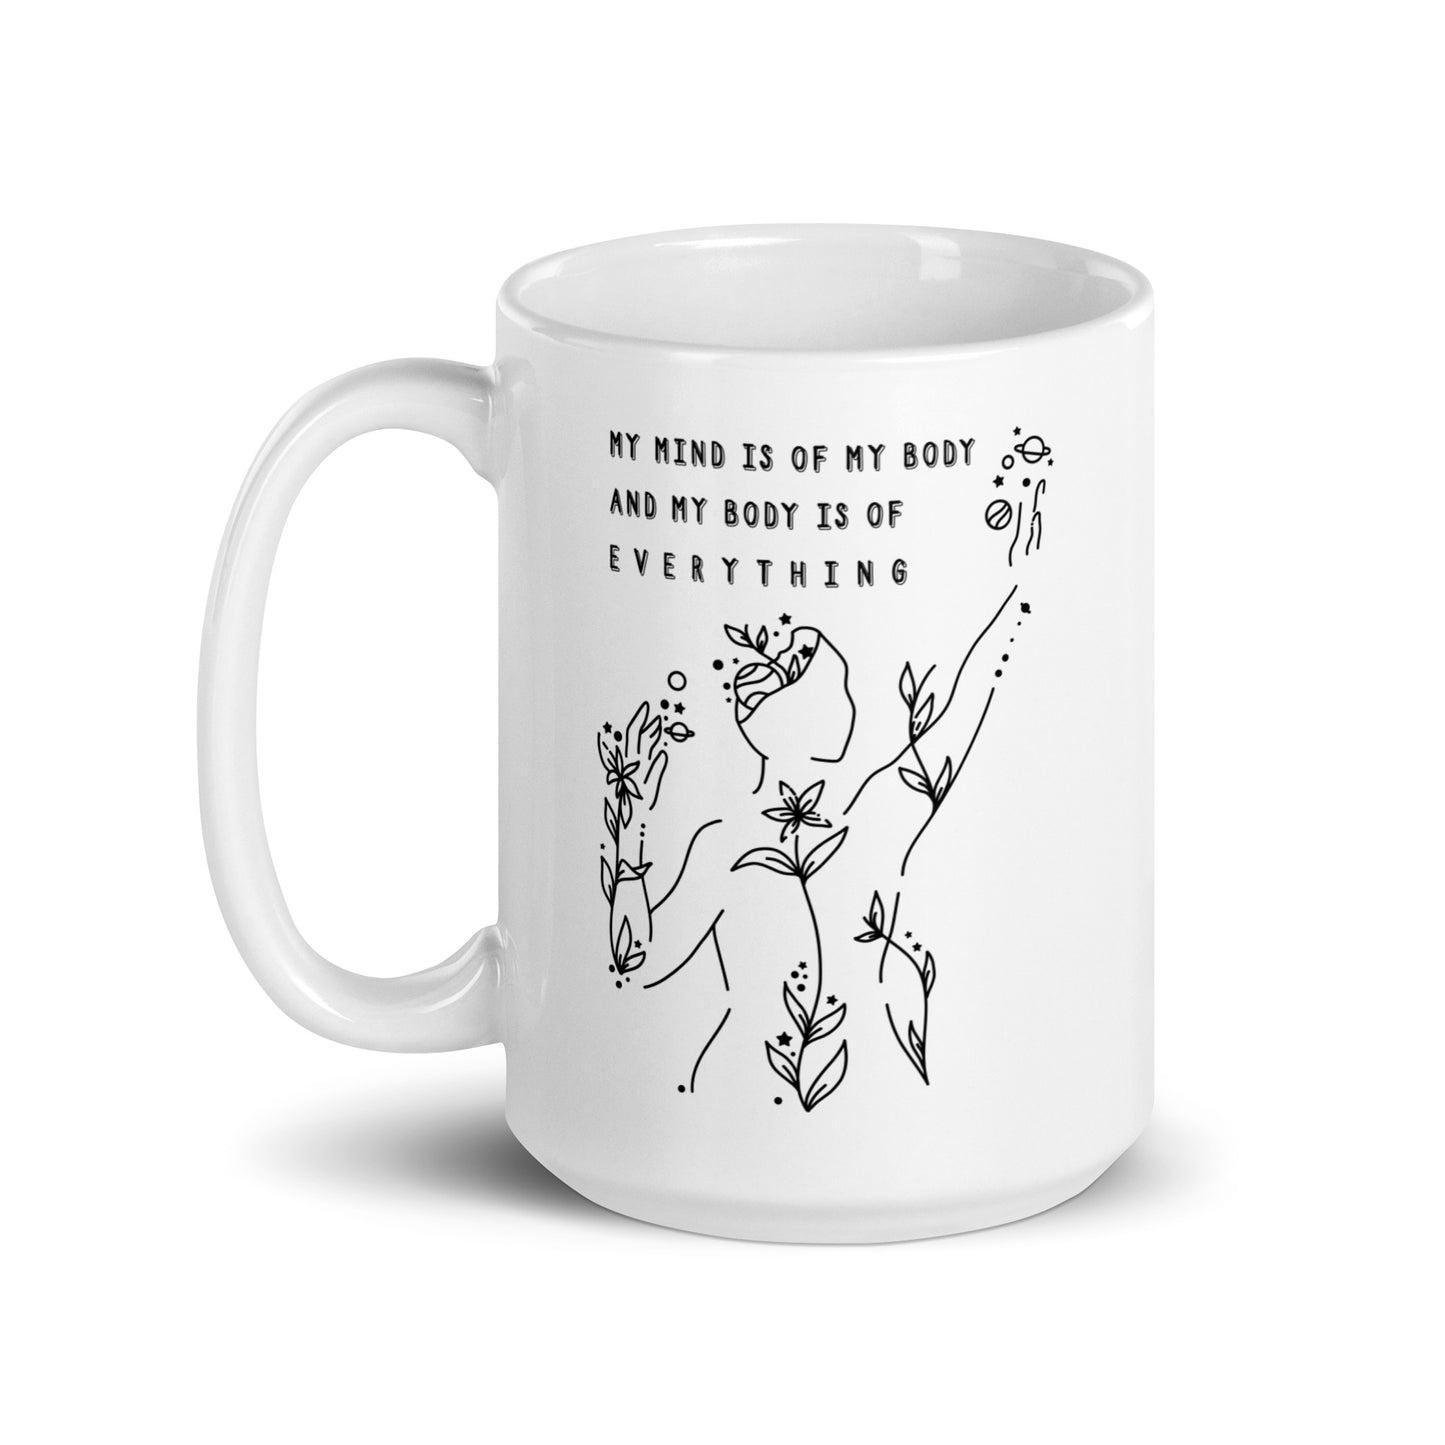 A white 15 ounce coffee mug featuring an abstract illustration of a figure whose body is spreading out into plants and planets and stars. Text above the figure reads "My mind is of my body and my body is of everything."